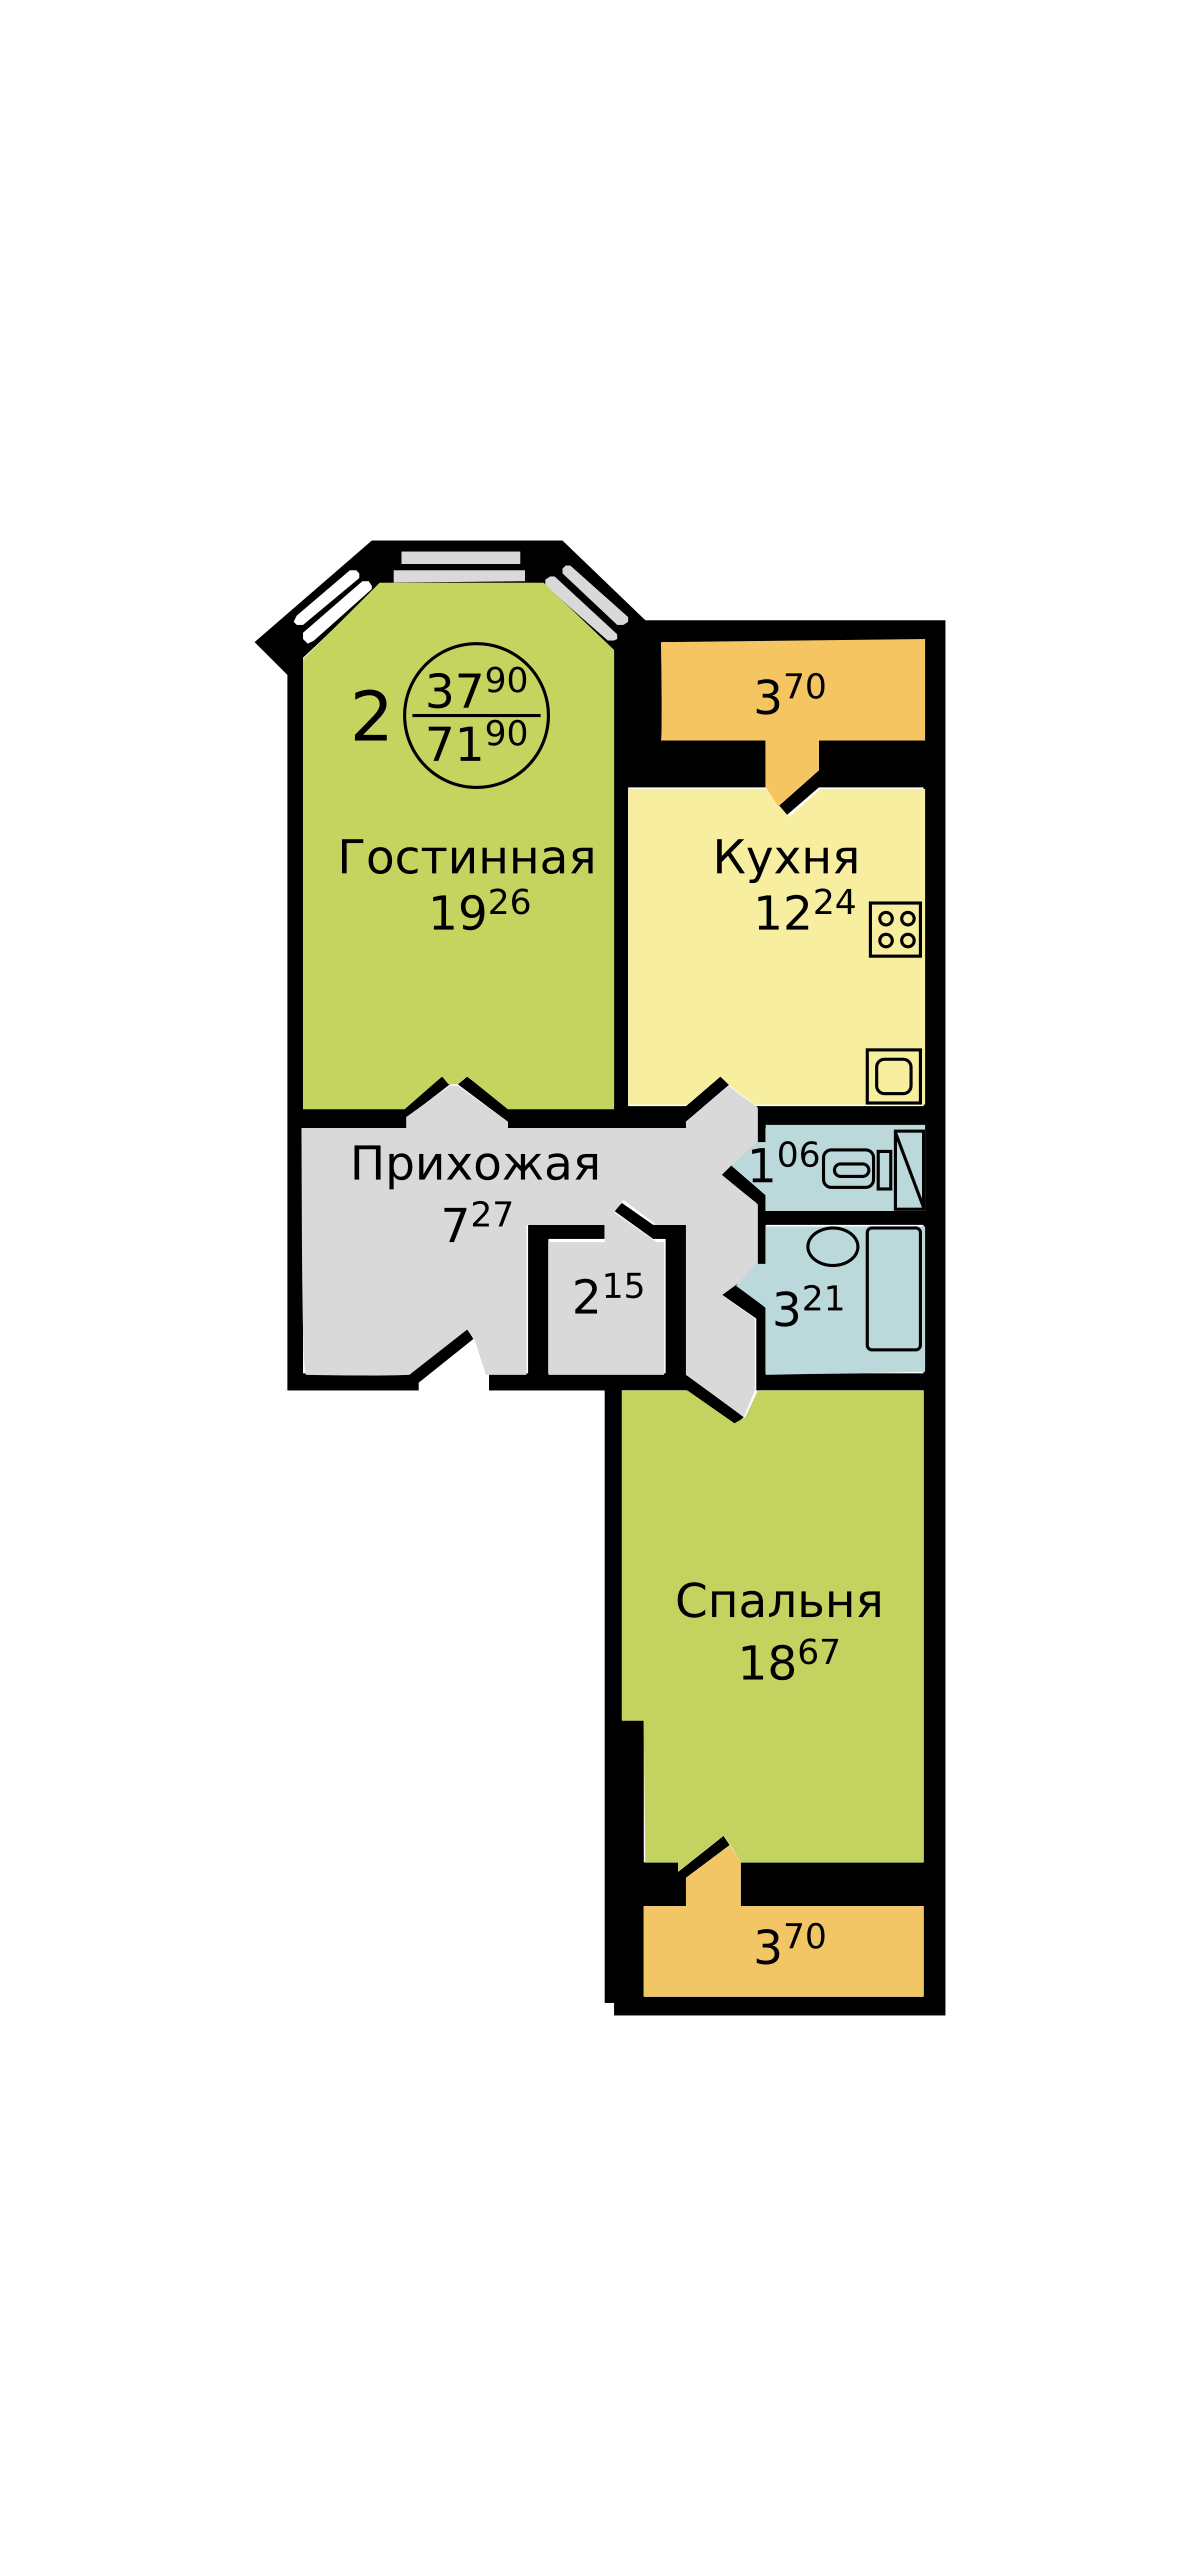 Layout of a 2-room apartment of the «NS-1» series in vector svg form